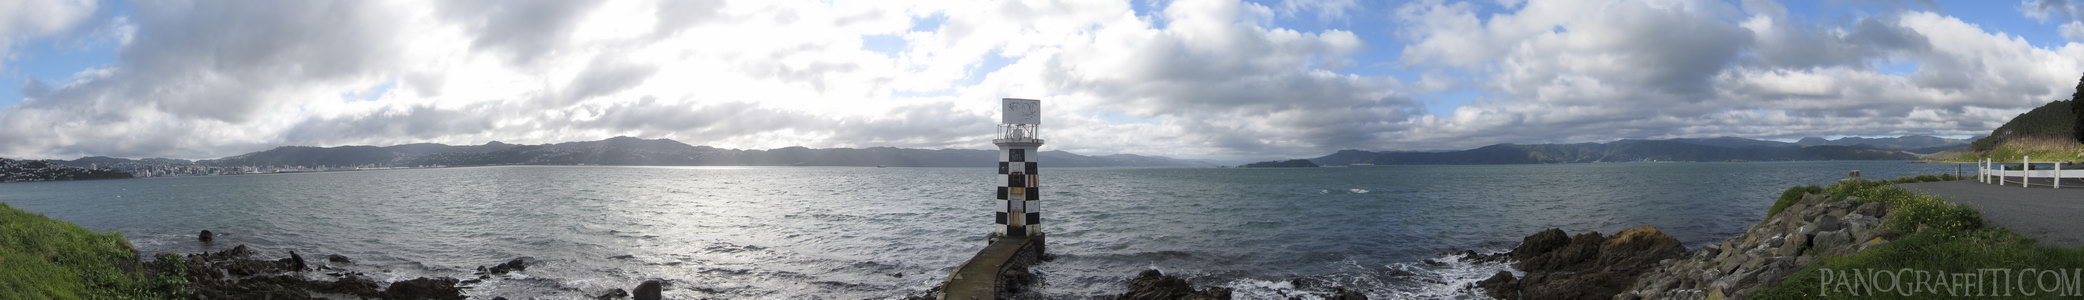 Point Halswell Lighthouse - Located a short distance away from Wellington centra, Point Halswell has this iconic lighthouse on a small jetty